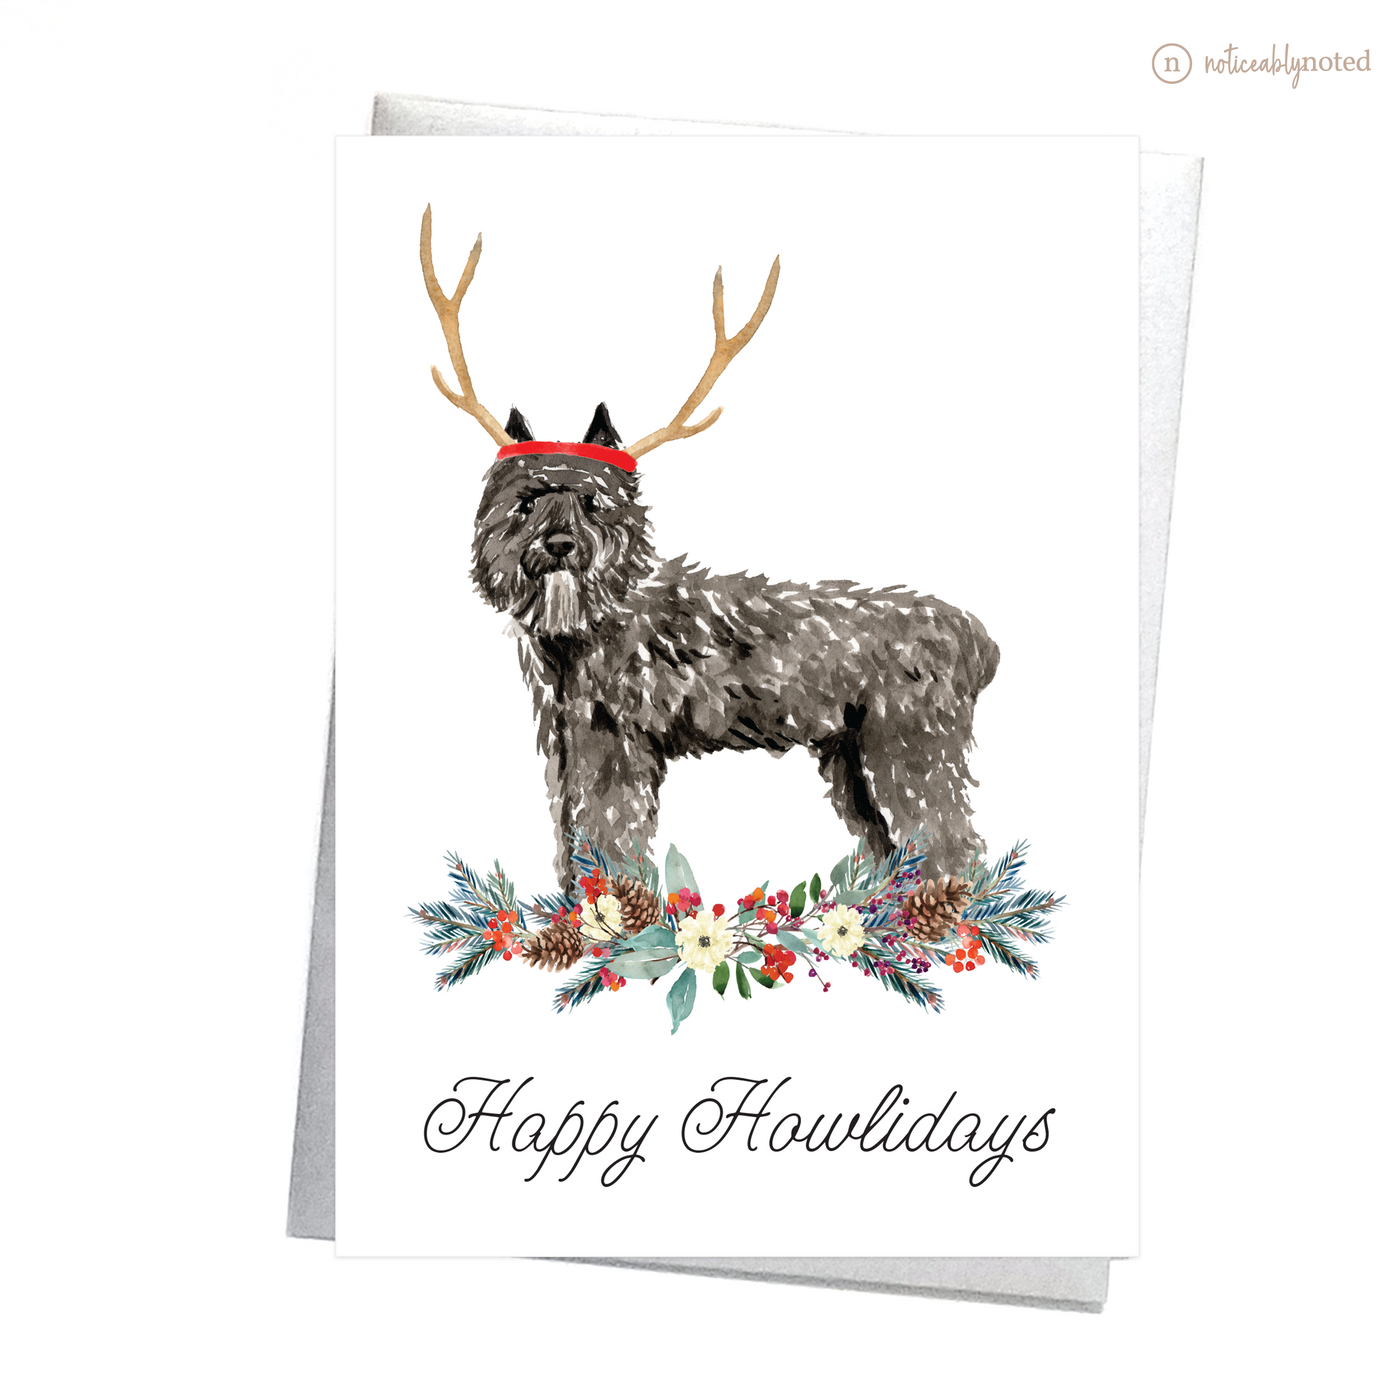 Bouvier des Flandres Dog Christmas Card | Noticeably Noted